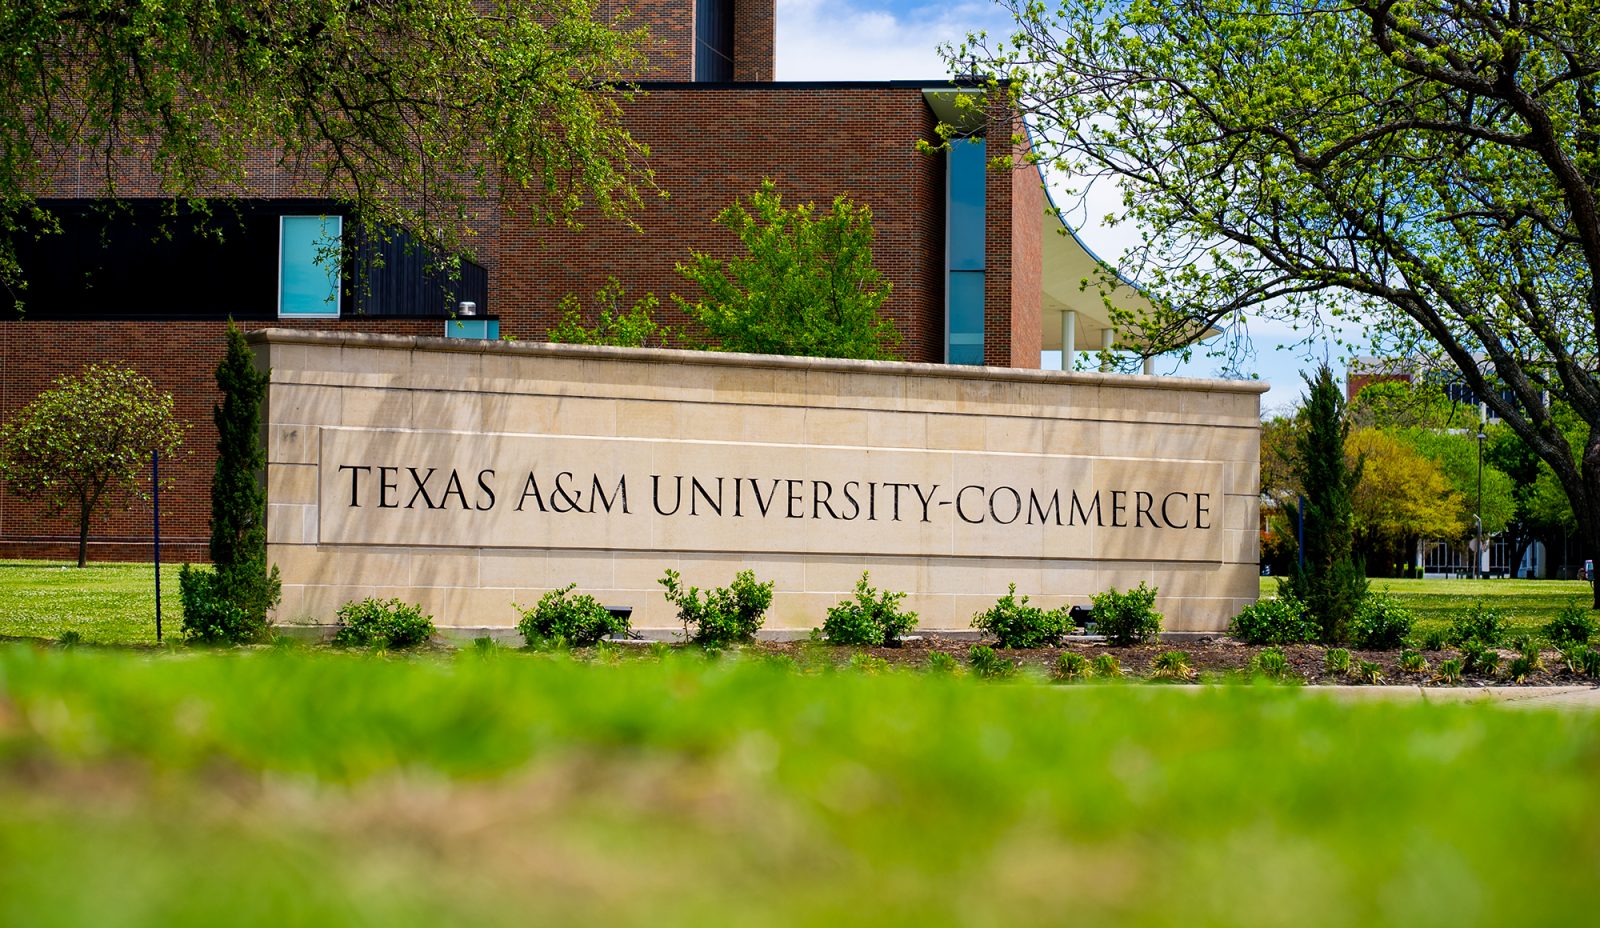 Licensing - Texas A&M University-Commerce